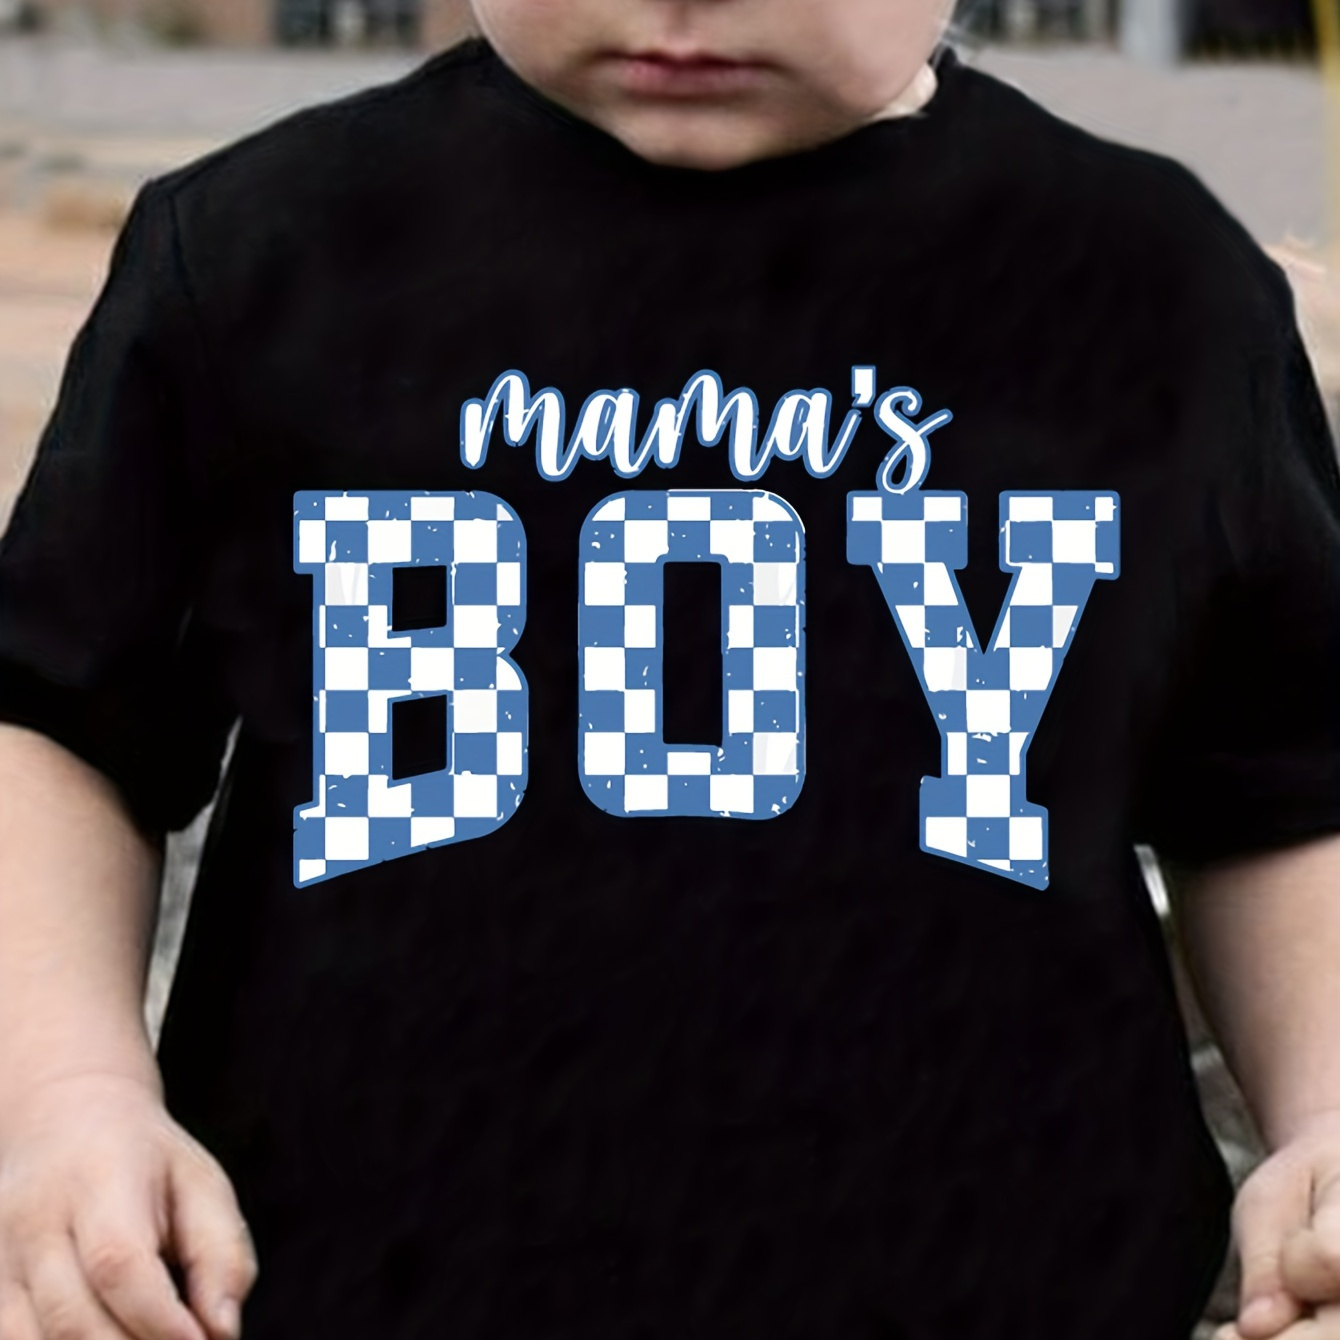 

Mama's Boy Print Tee, Boys' Casual & Trendy Crew Neck Short Sleeve T-shirt For Spring & Summer, Boys' Clothes For Everyday Life